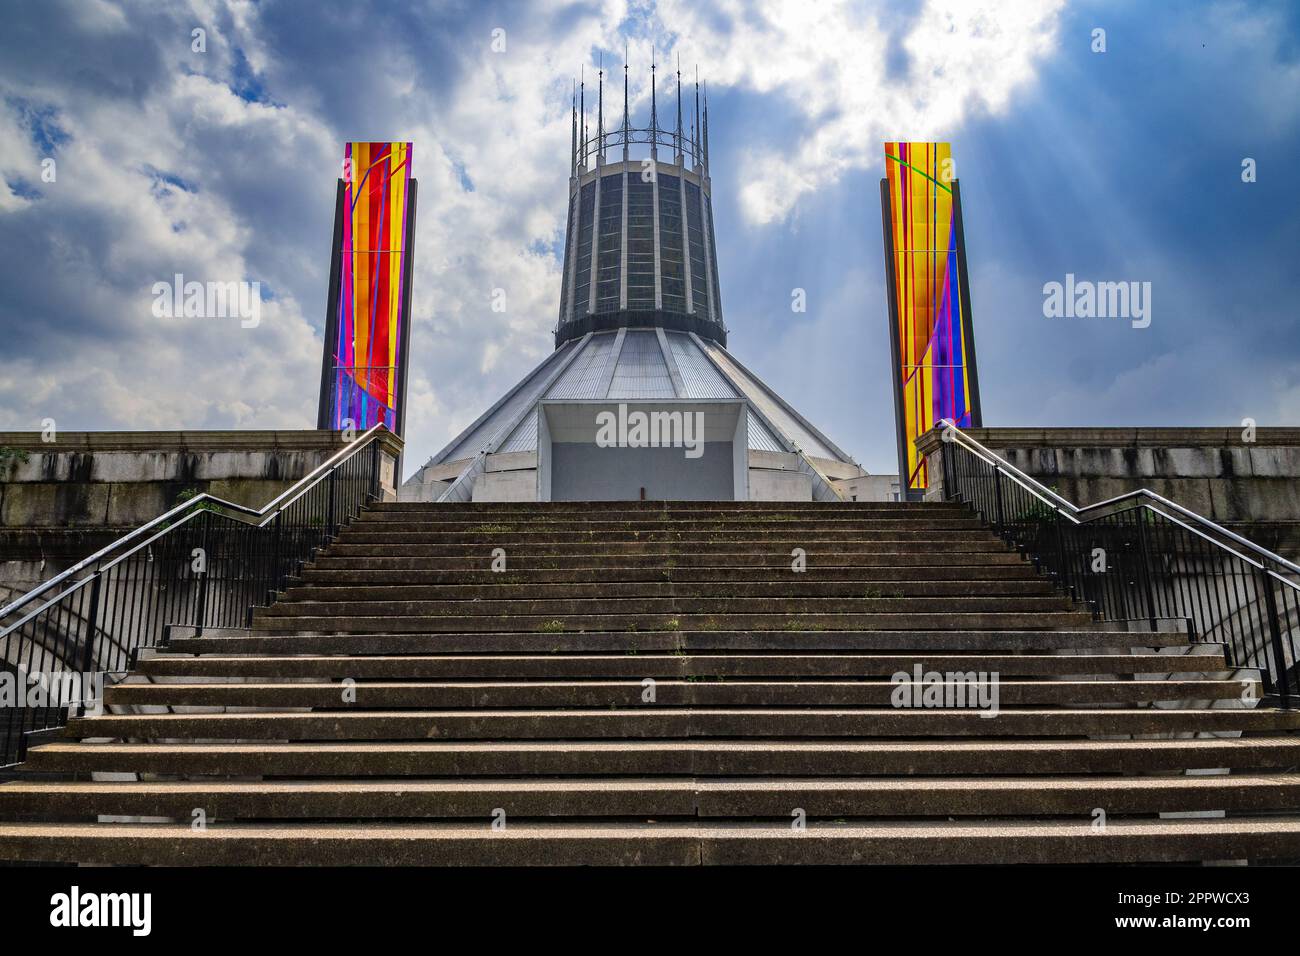 Liverpool Metroploitain roman catholic cathedral of Christ the King on Mount Pleasant in Liverpool. Also know locally as Paddy's Wigwam. Stock Photo